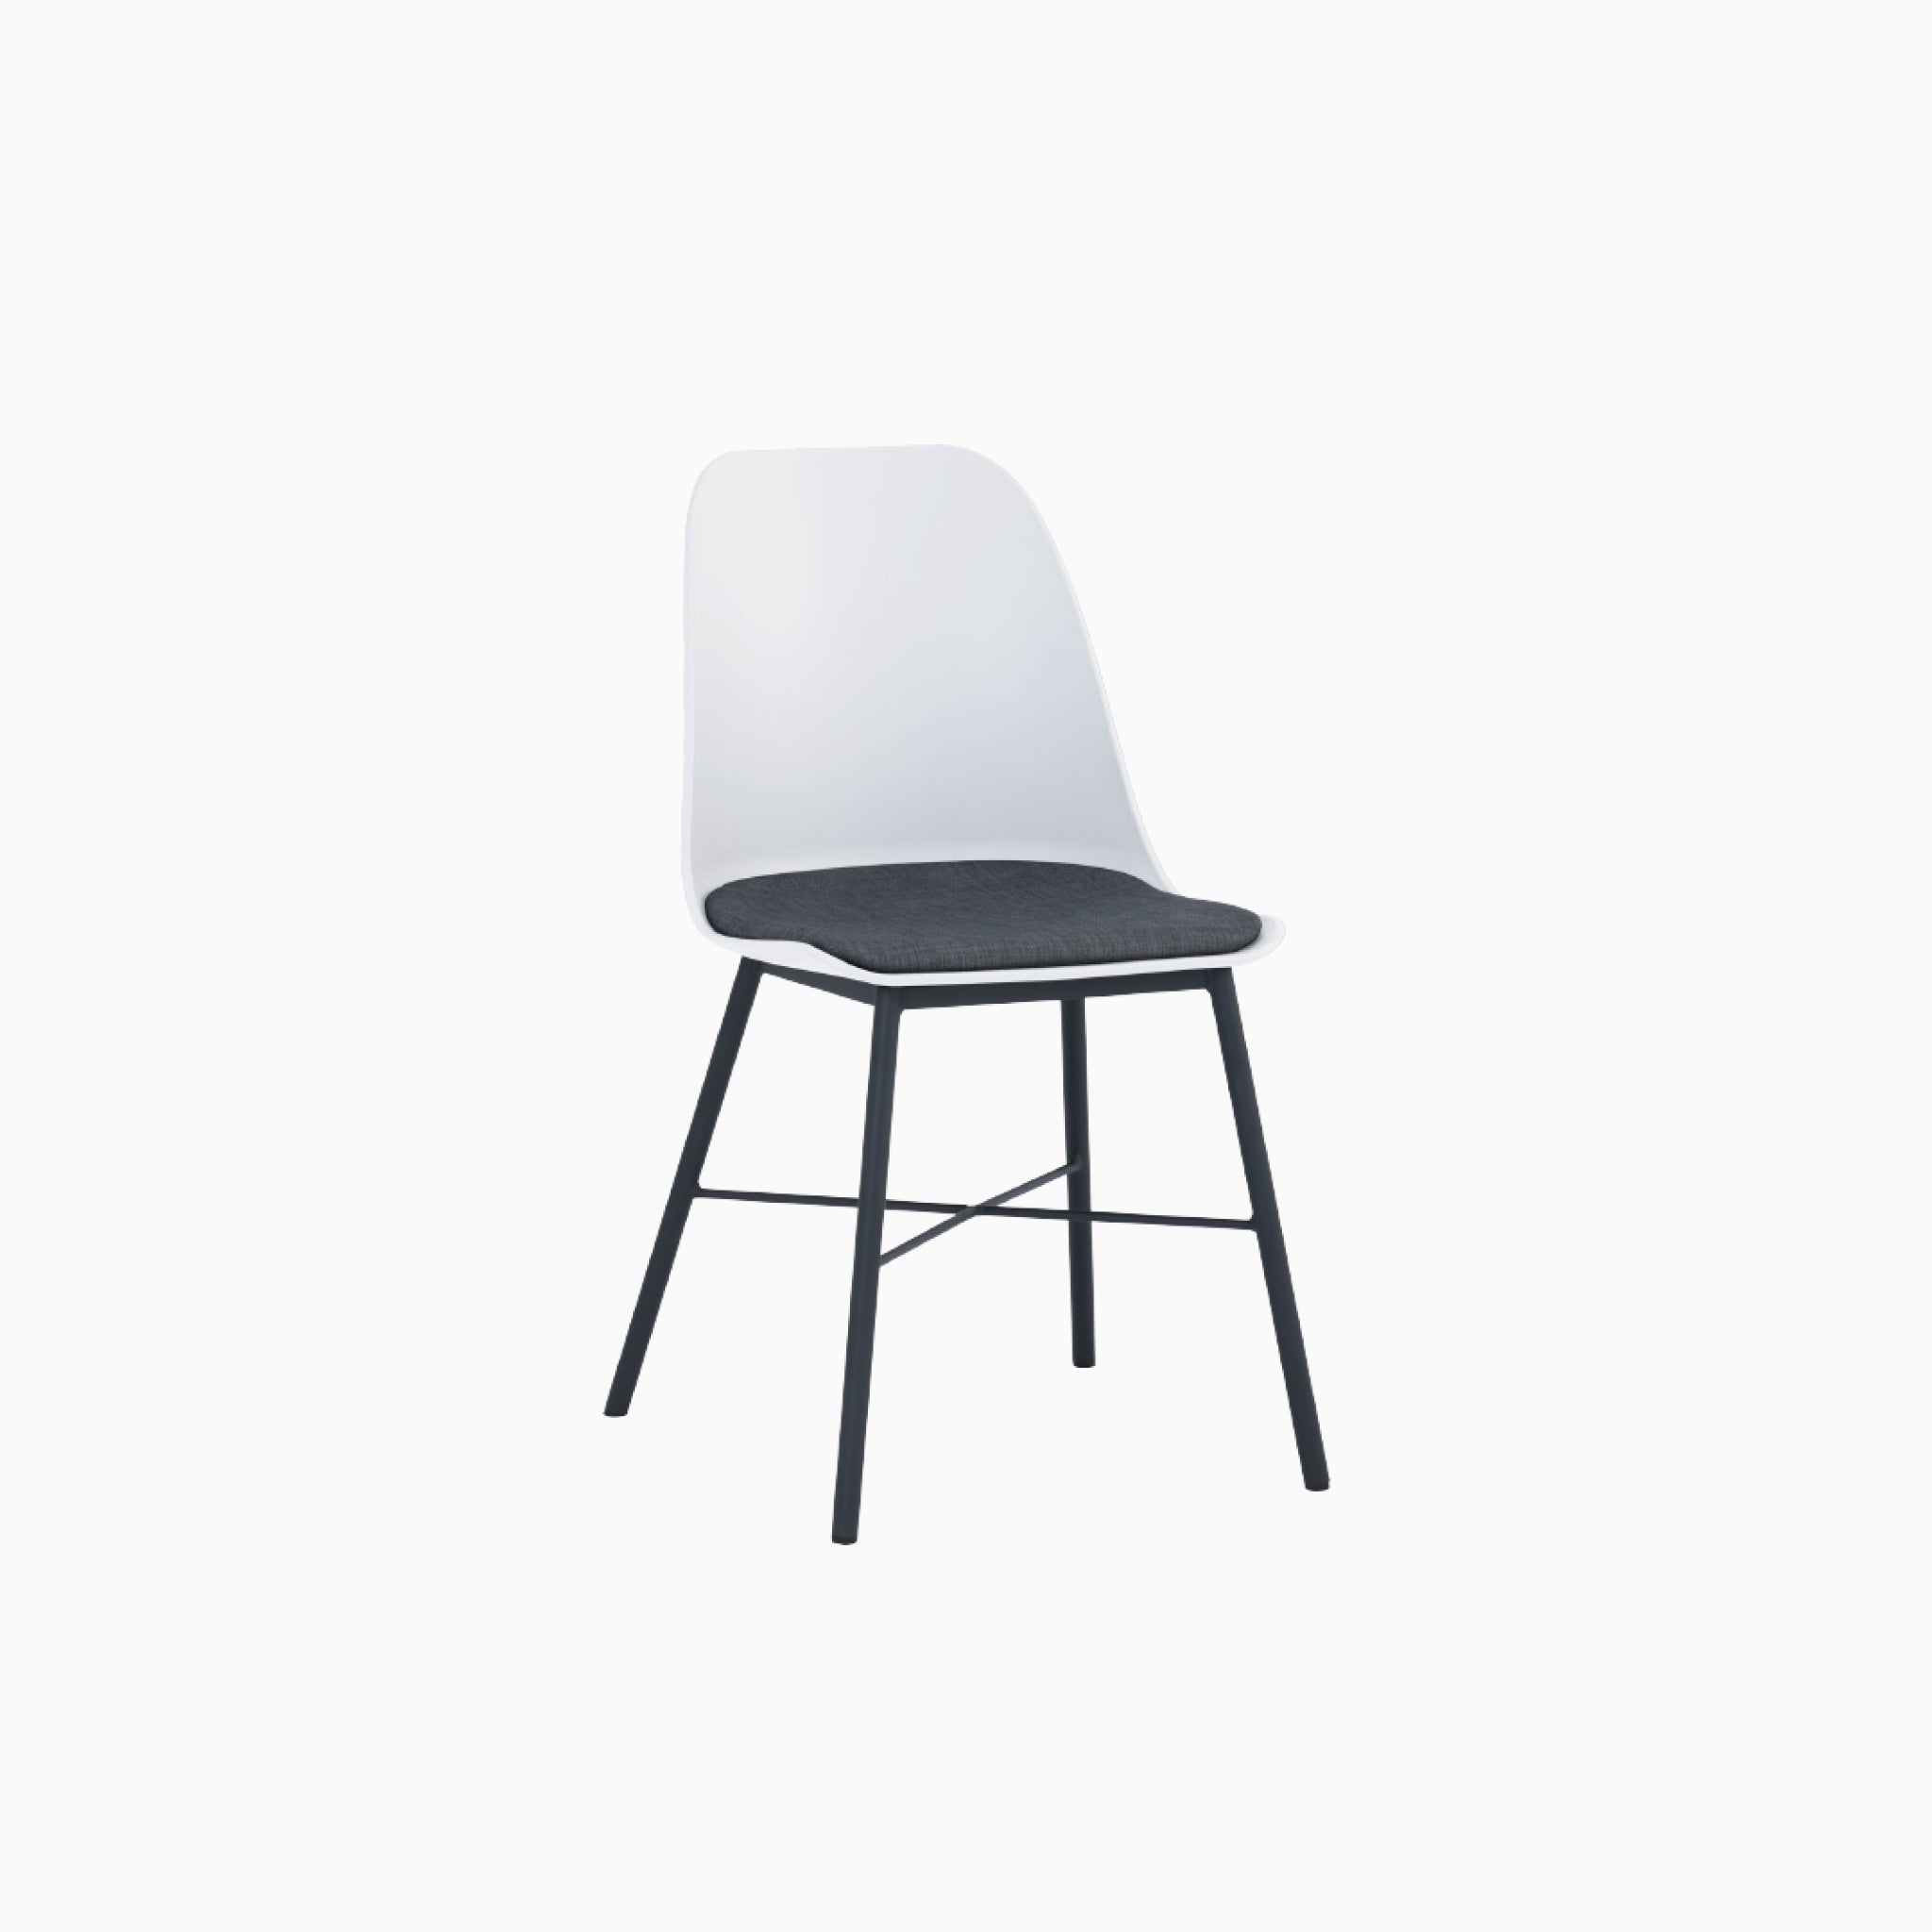 Lumo White Dining Chair with Black Leg (Set of 2)